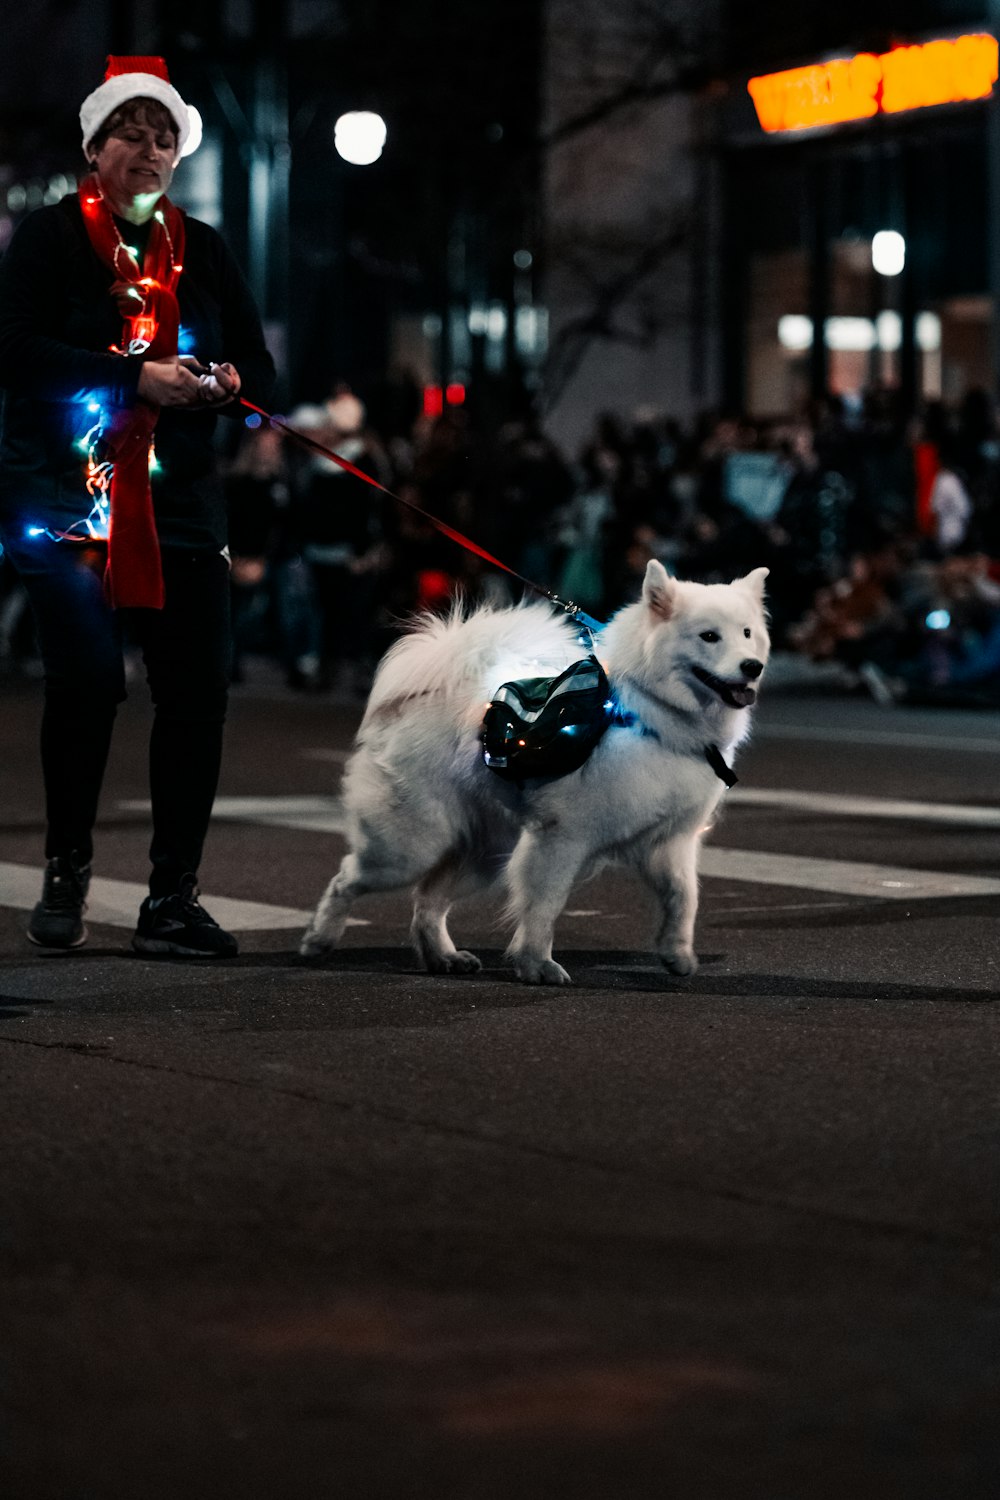 a person walking a white dog on a leash